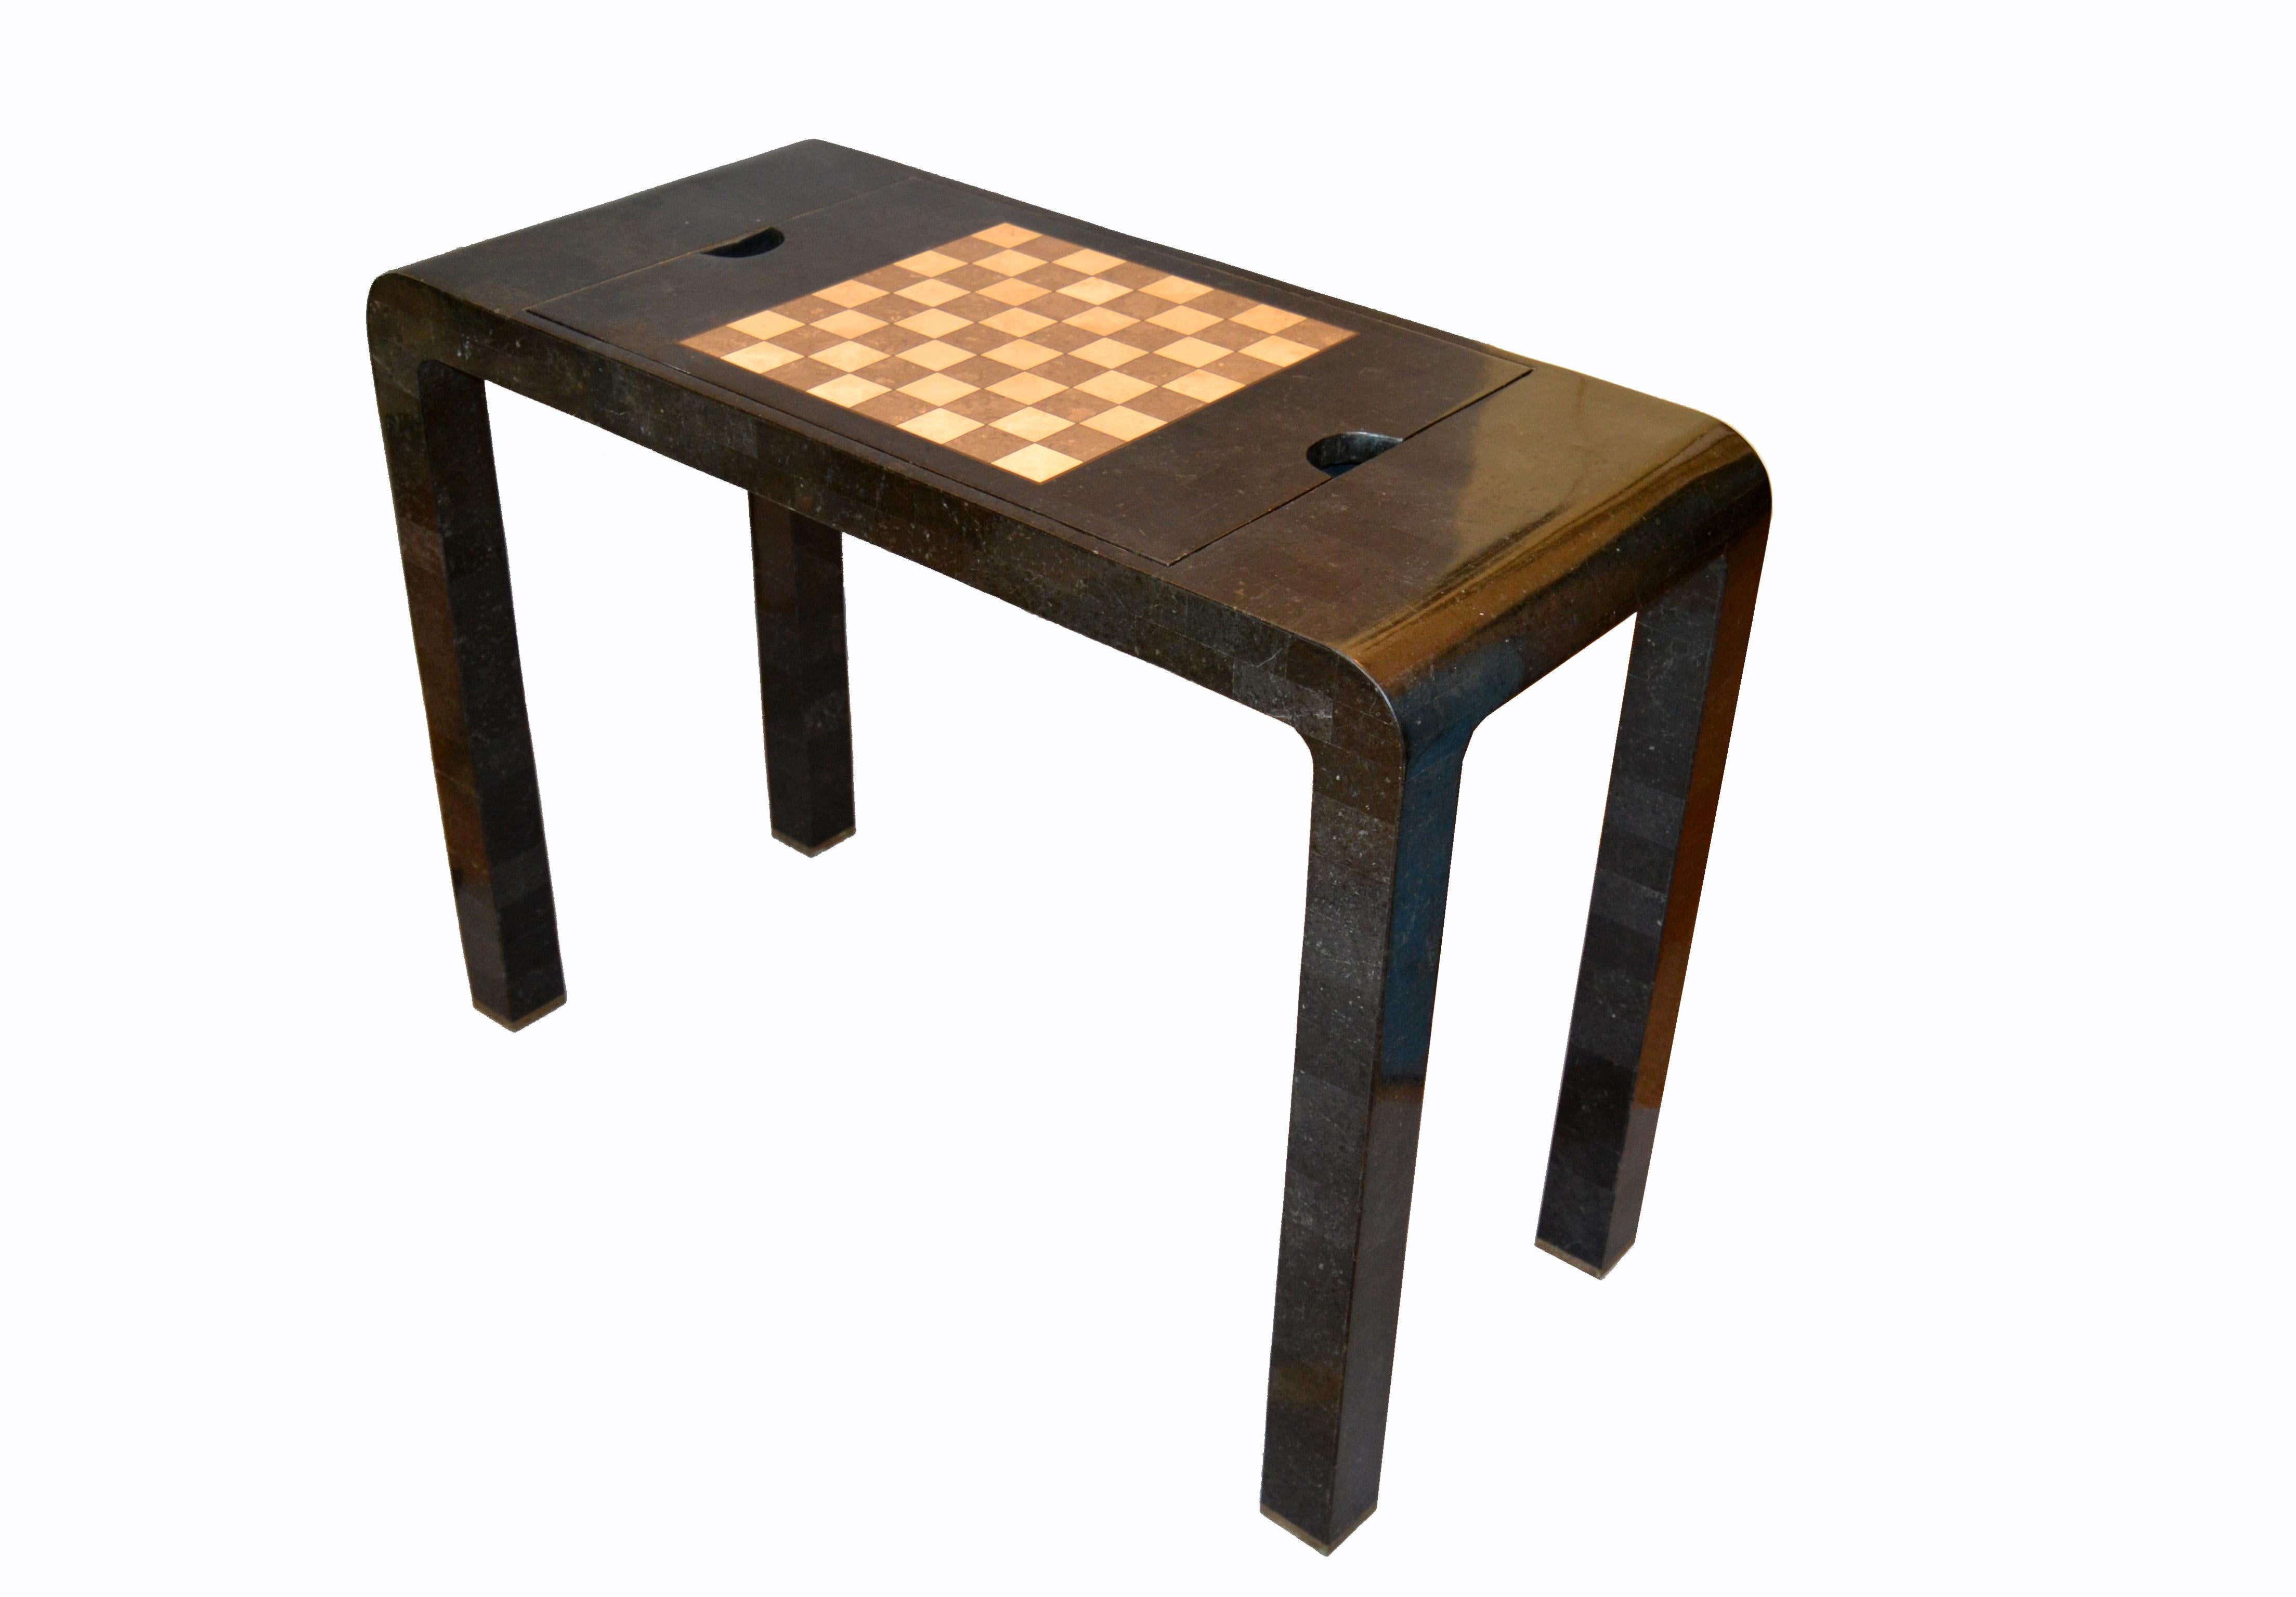 Mid-Century Modern reversable console into a chess or backgammon game table by Maitland Smith.
A dark gray tessellated stone over wood covered table or console. The centre section can be rotated into a chess game or taken off to play